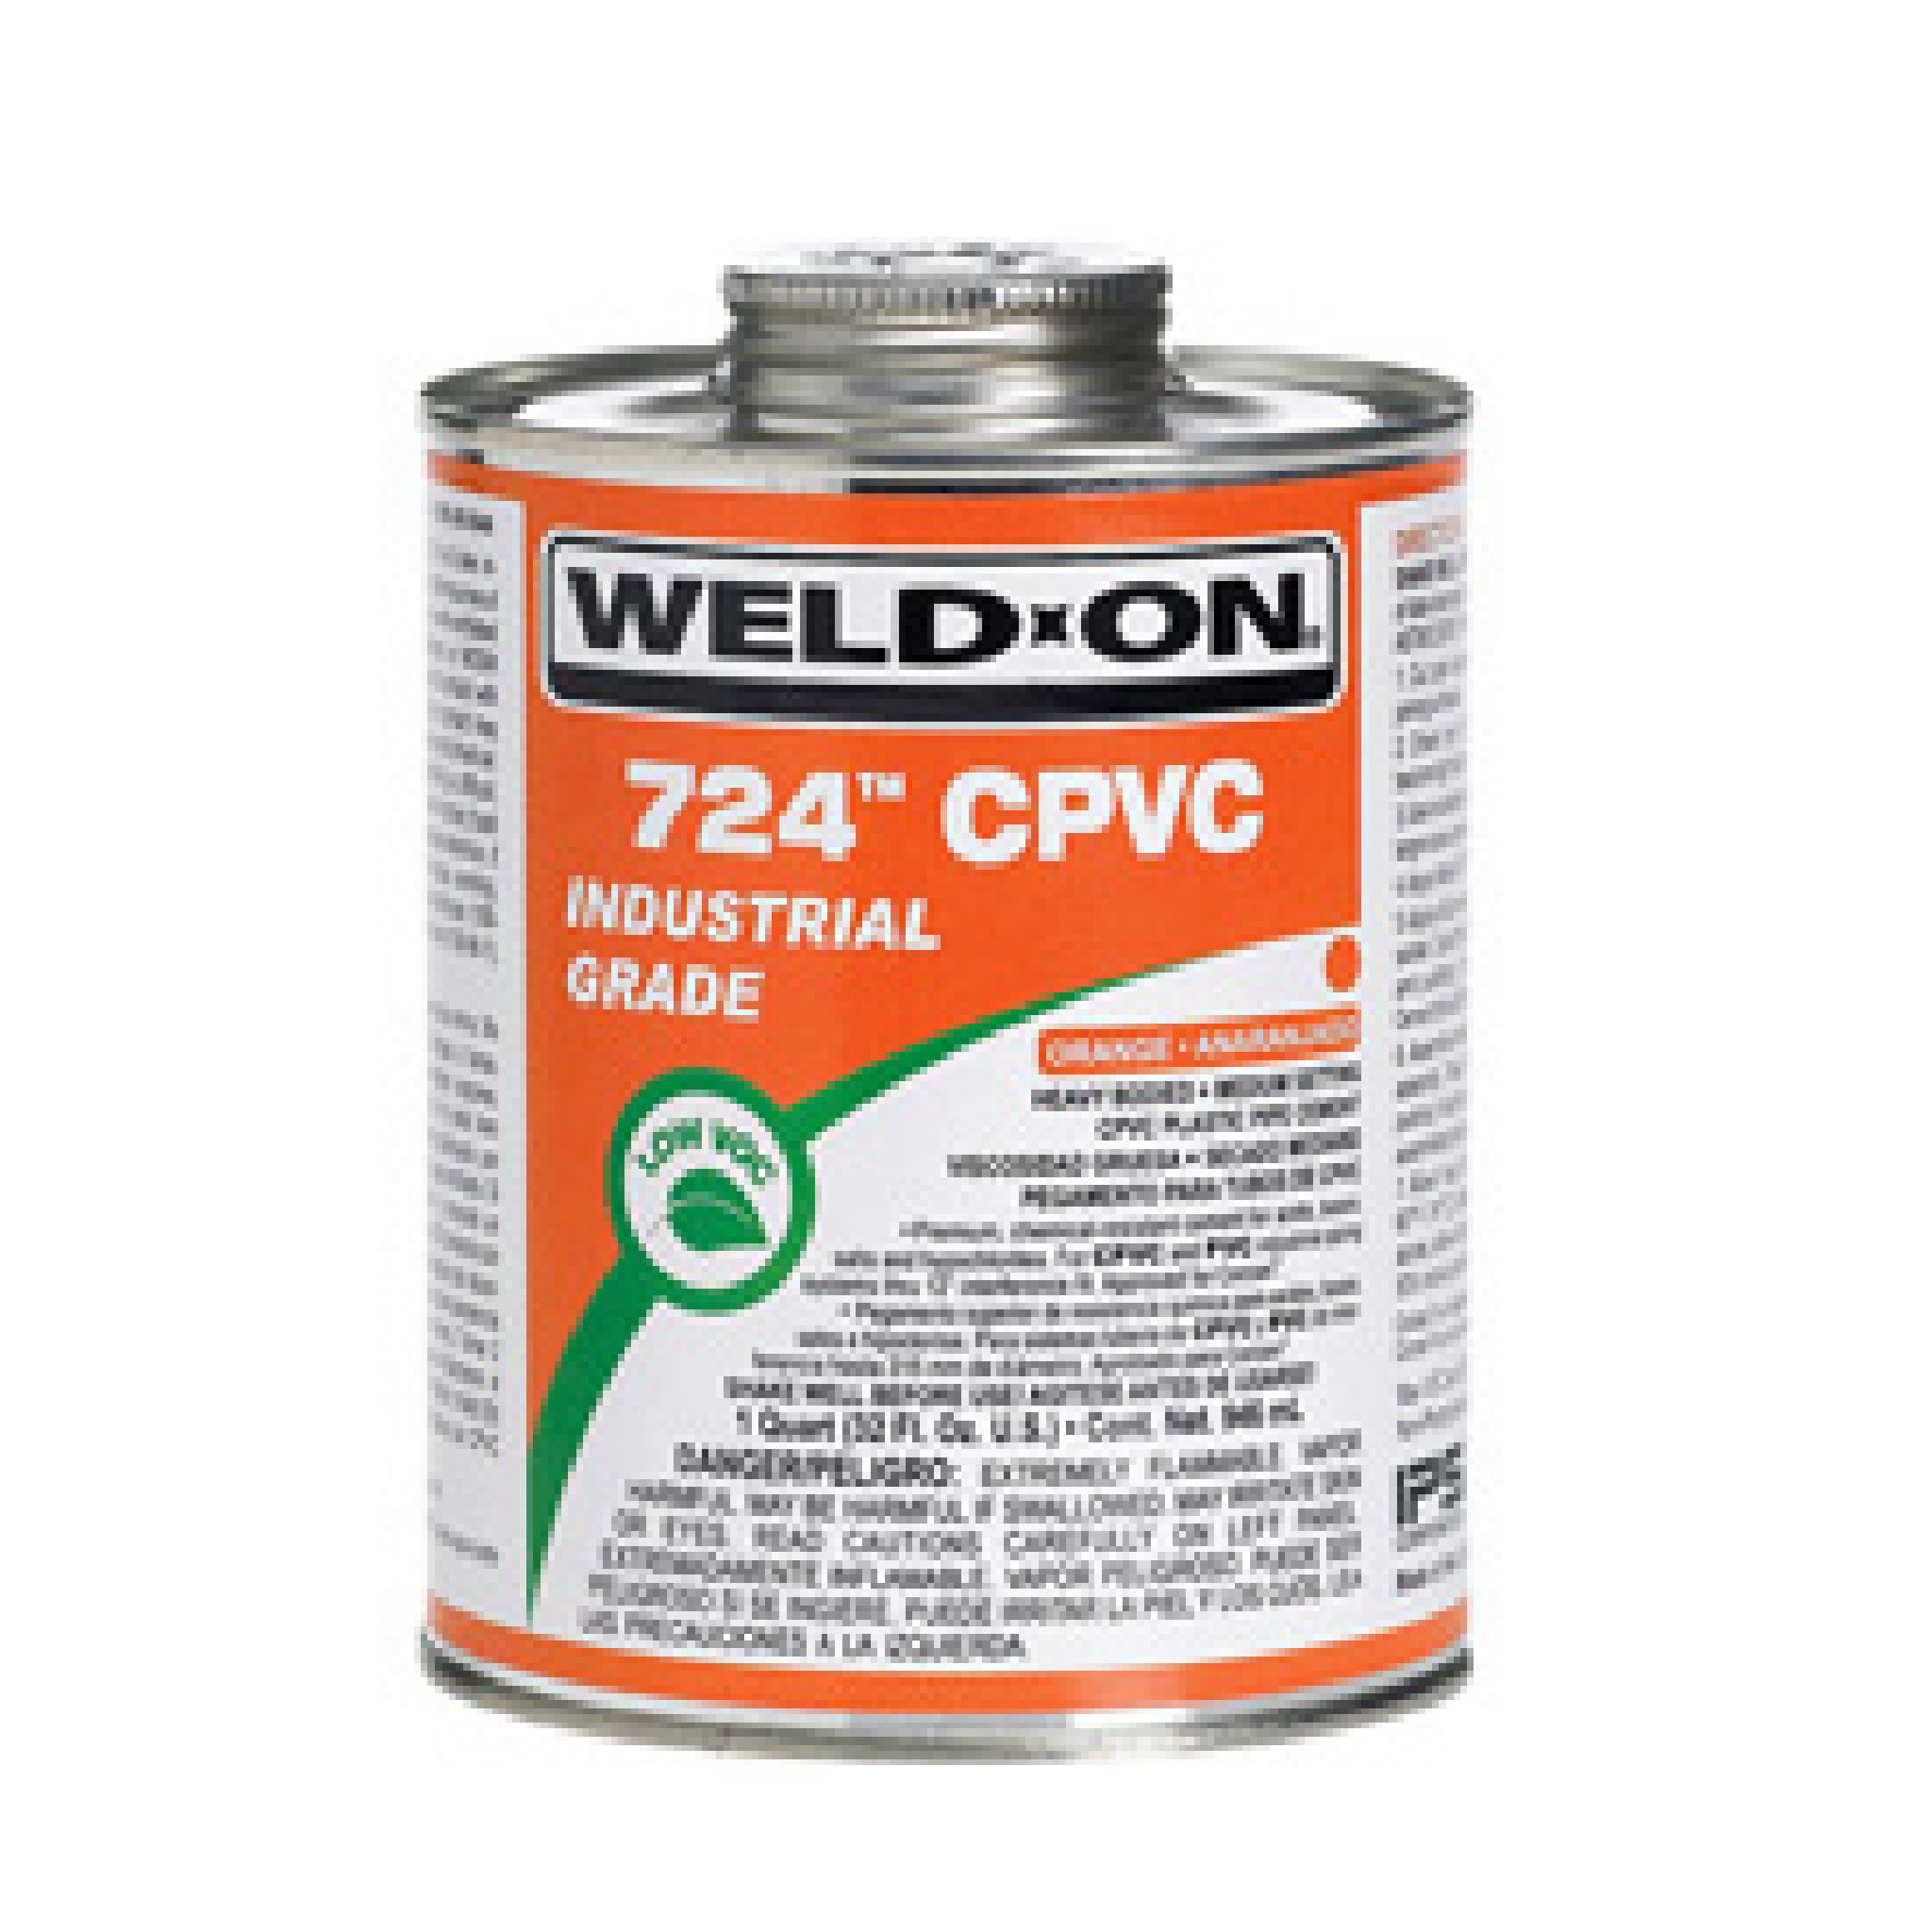 WELD-ON 724 GREY CPVC Solvent Cement, PVC Adhesive 473ML